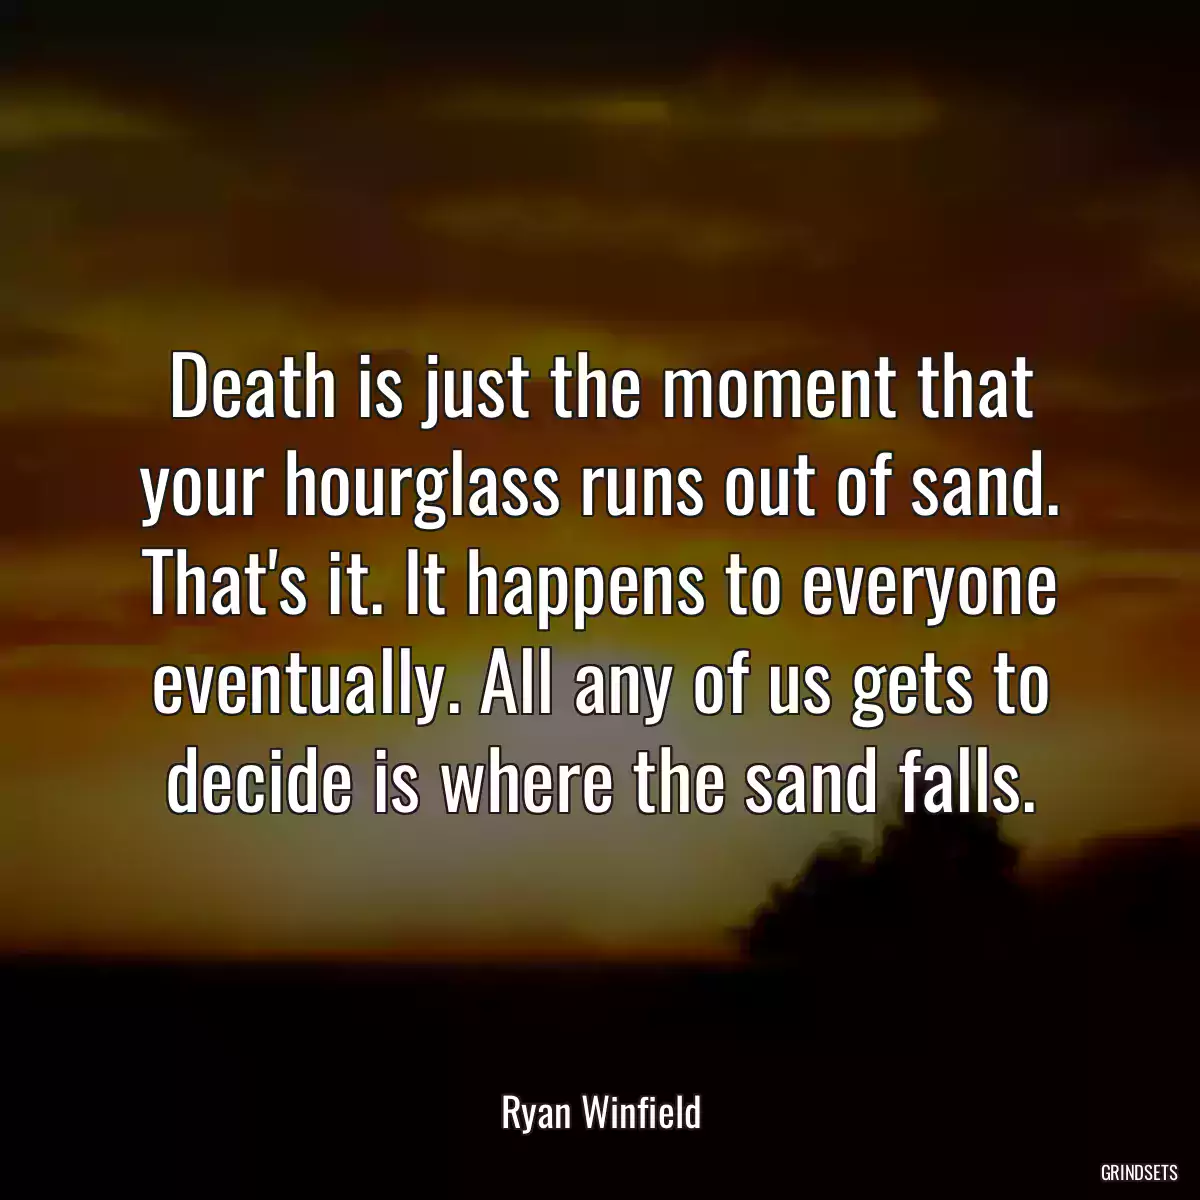 Death is just the moment that your hourglass runs out of sand. That\'s it. It happens to everyone eventually. All any of us gets to decide is where the sand falls.